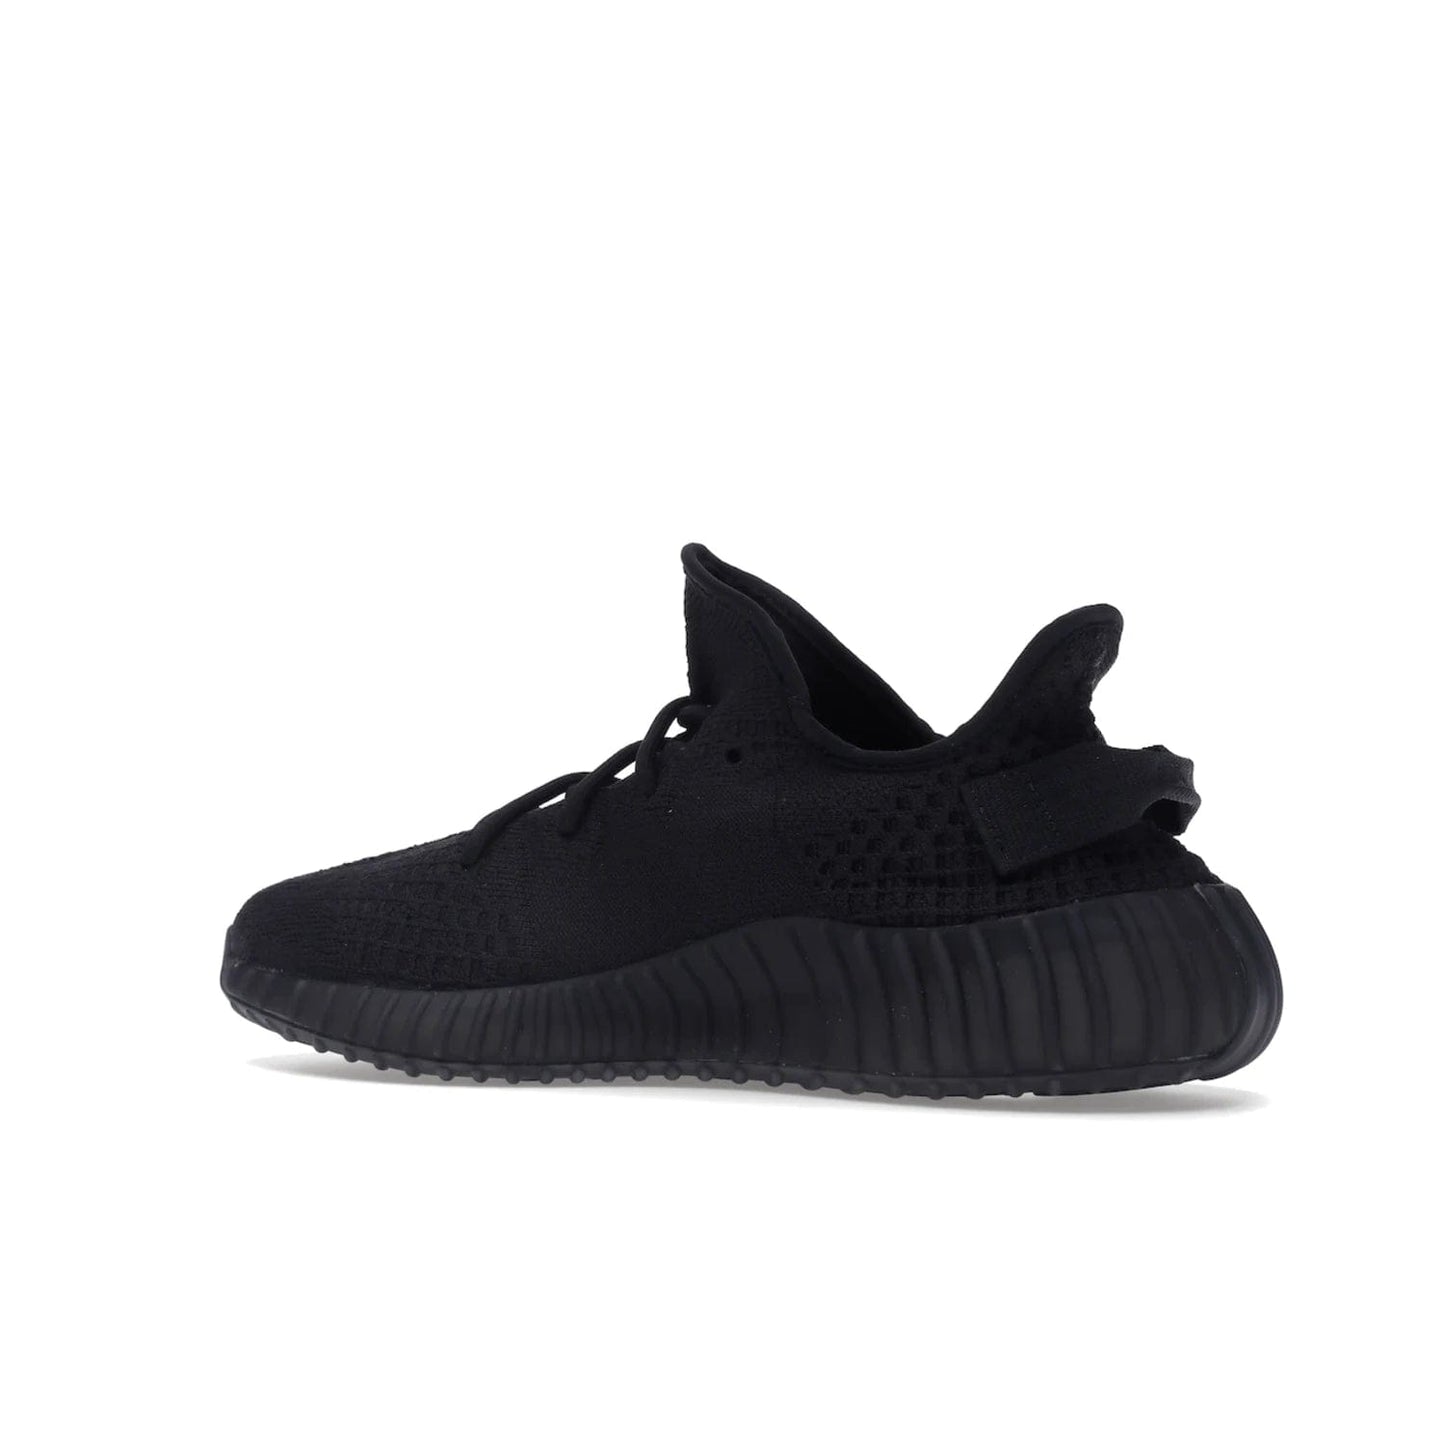 adidas Yeezy Boost 350 V2 Onyx - Image 22 - Only at www.BallersClubKickz.com - Adidas Yeezy Boost 350 V2 Onyx Triple Black shoes for comfort and style. Arriving Spring 2022.